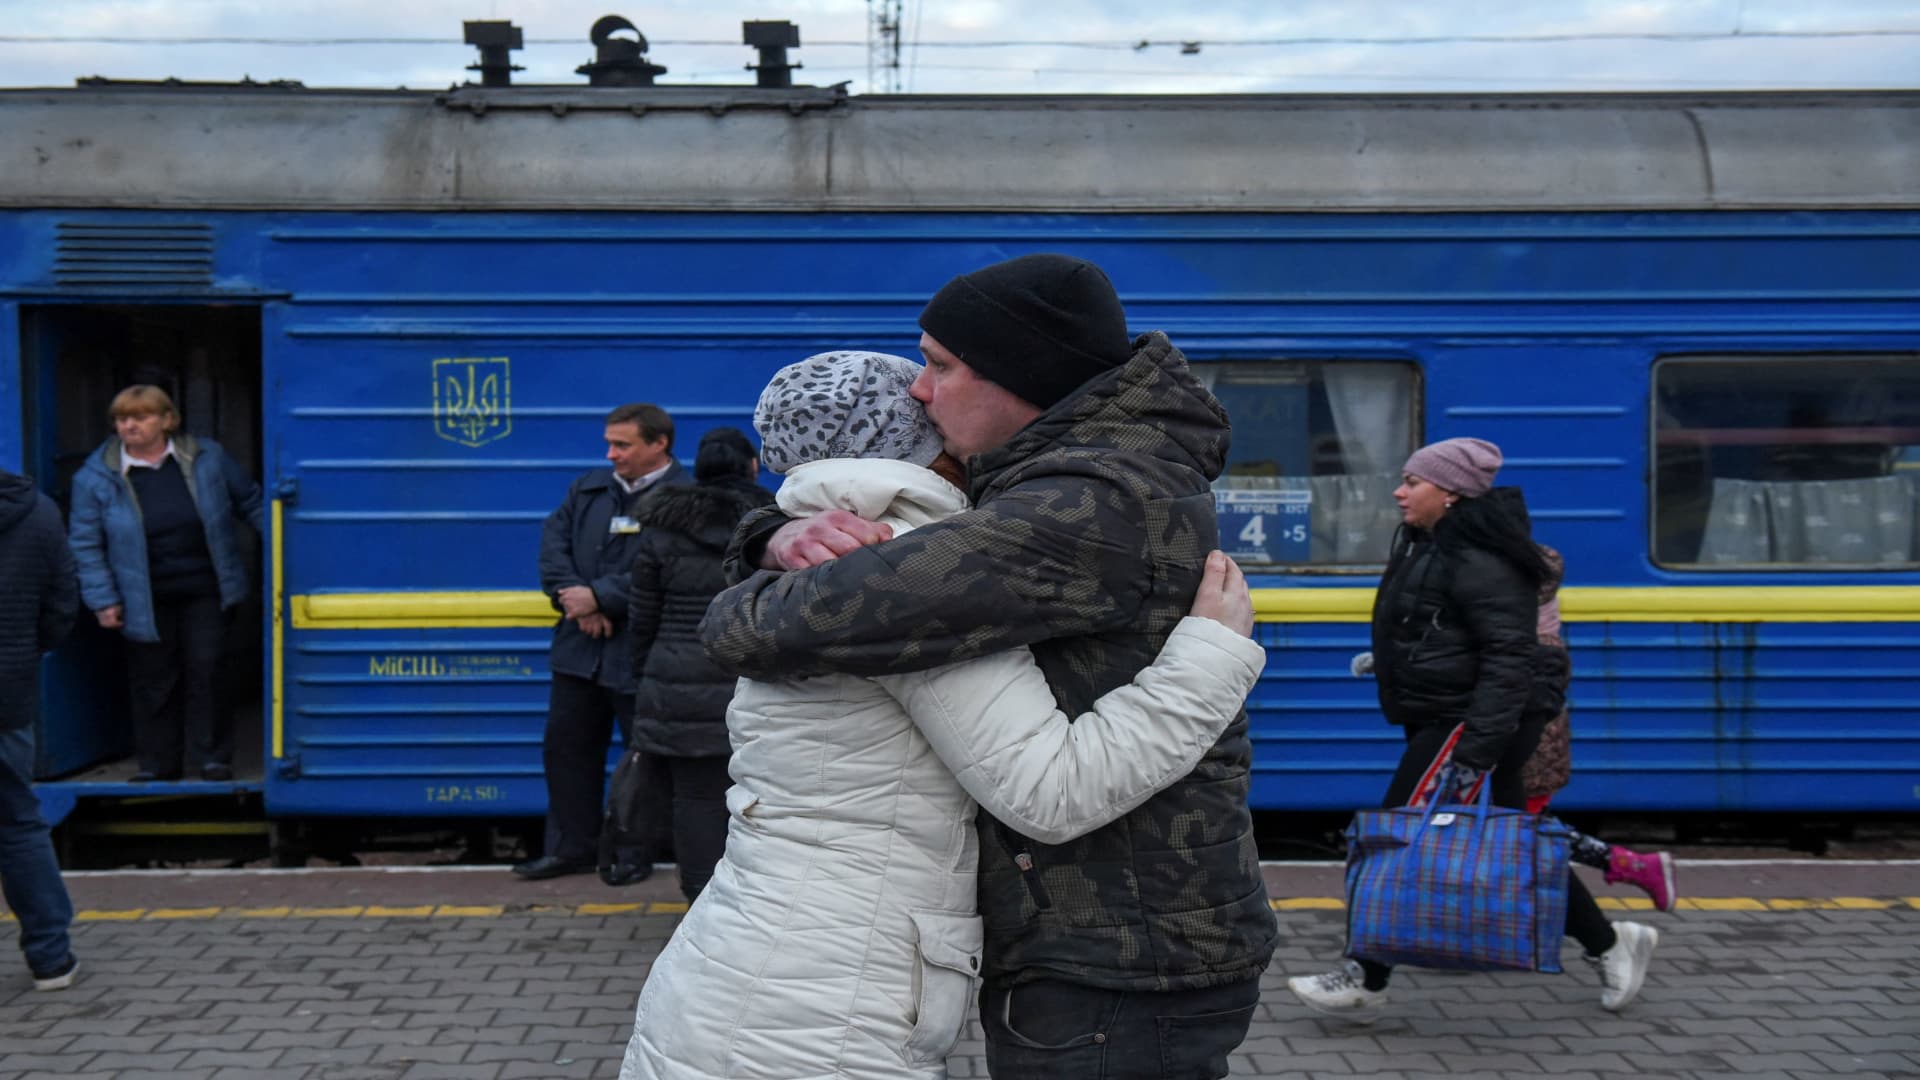 A couple embraces as passengers, including people fleeing Russia's invasion of Ukraine, board a train to leave the city of Odessa, Ukraine, March 6, 2022.